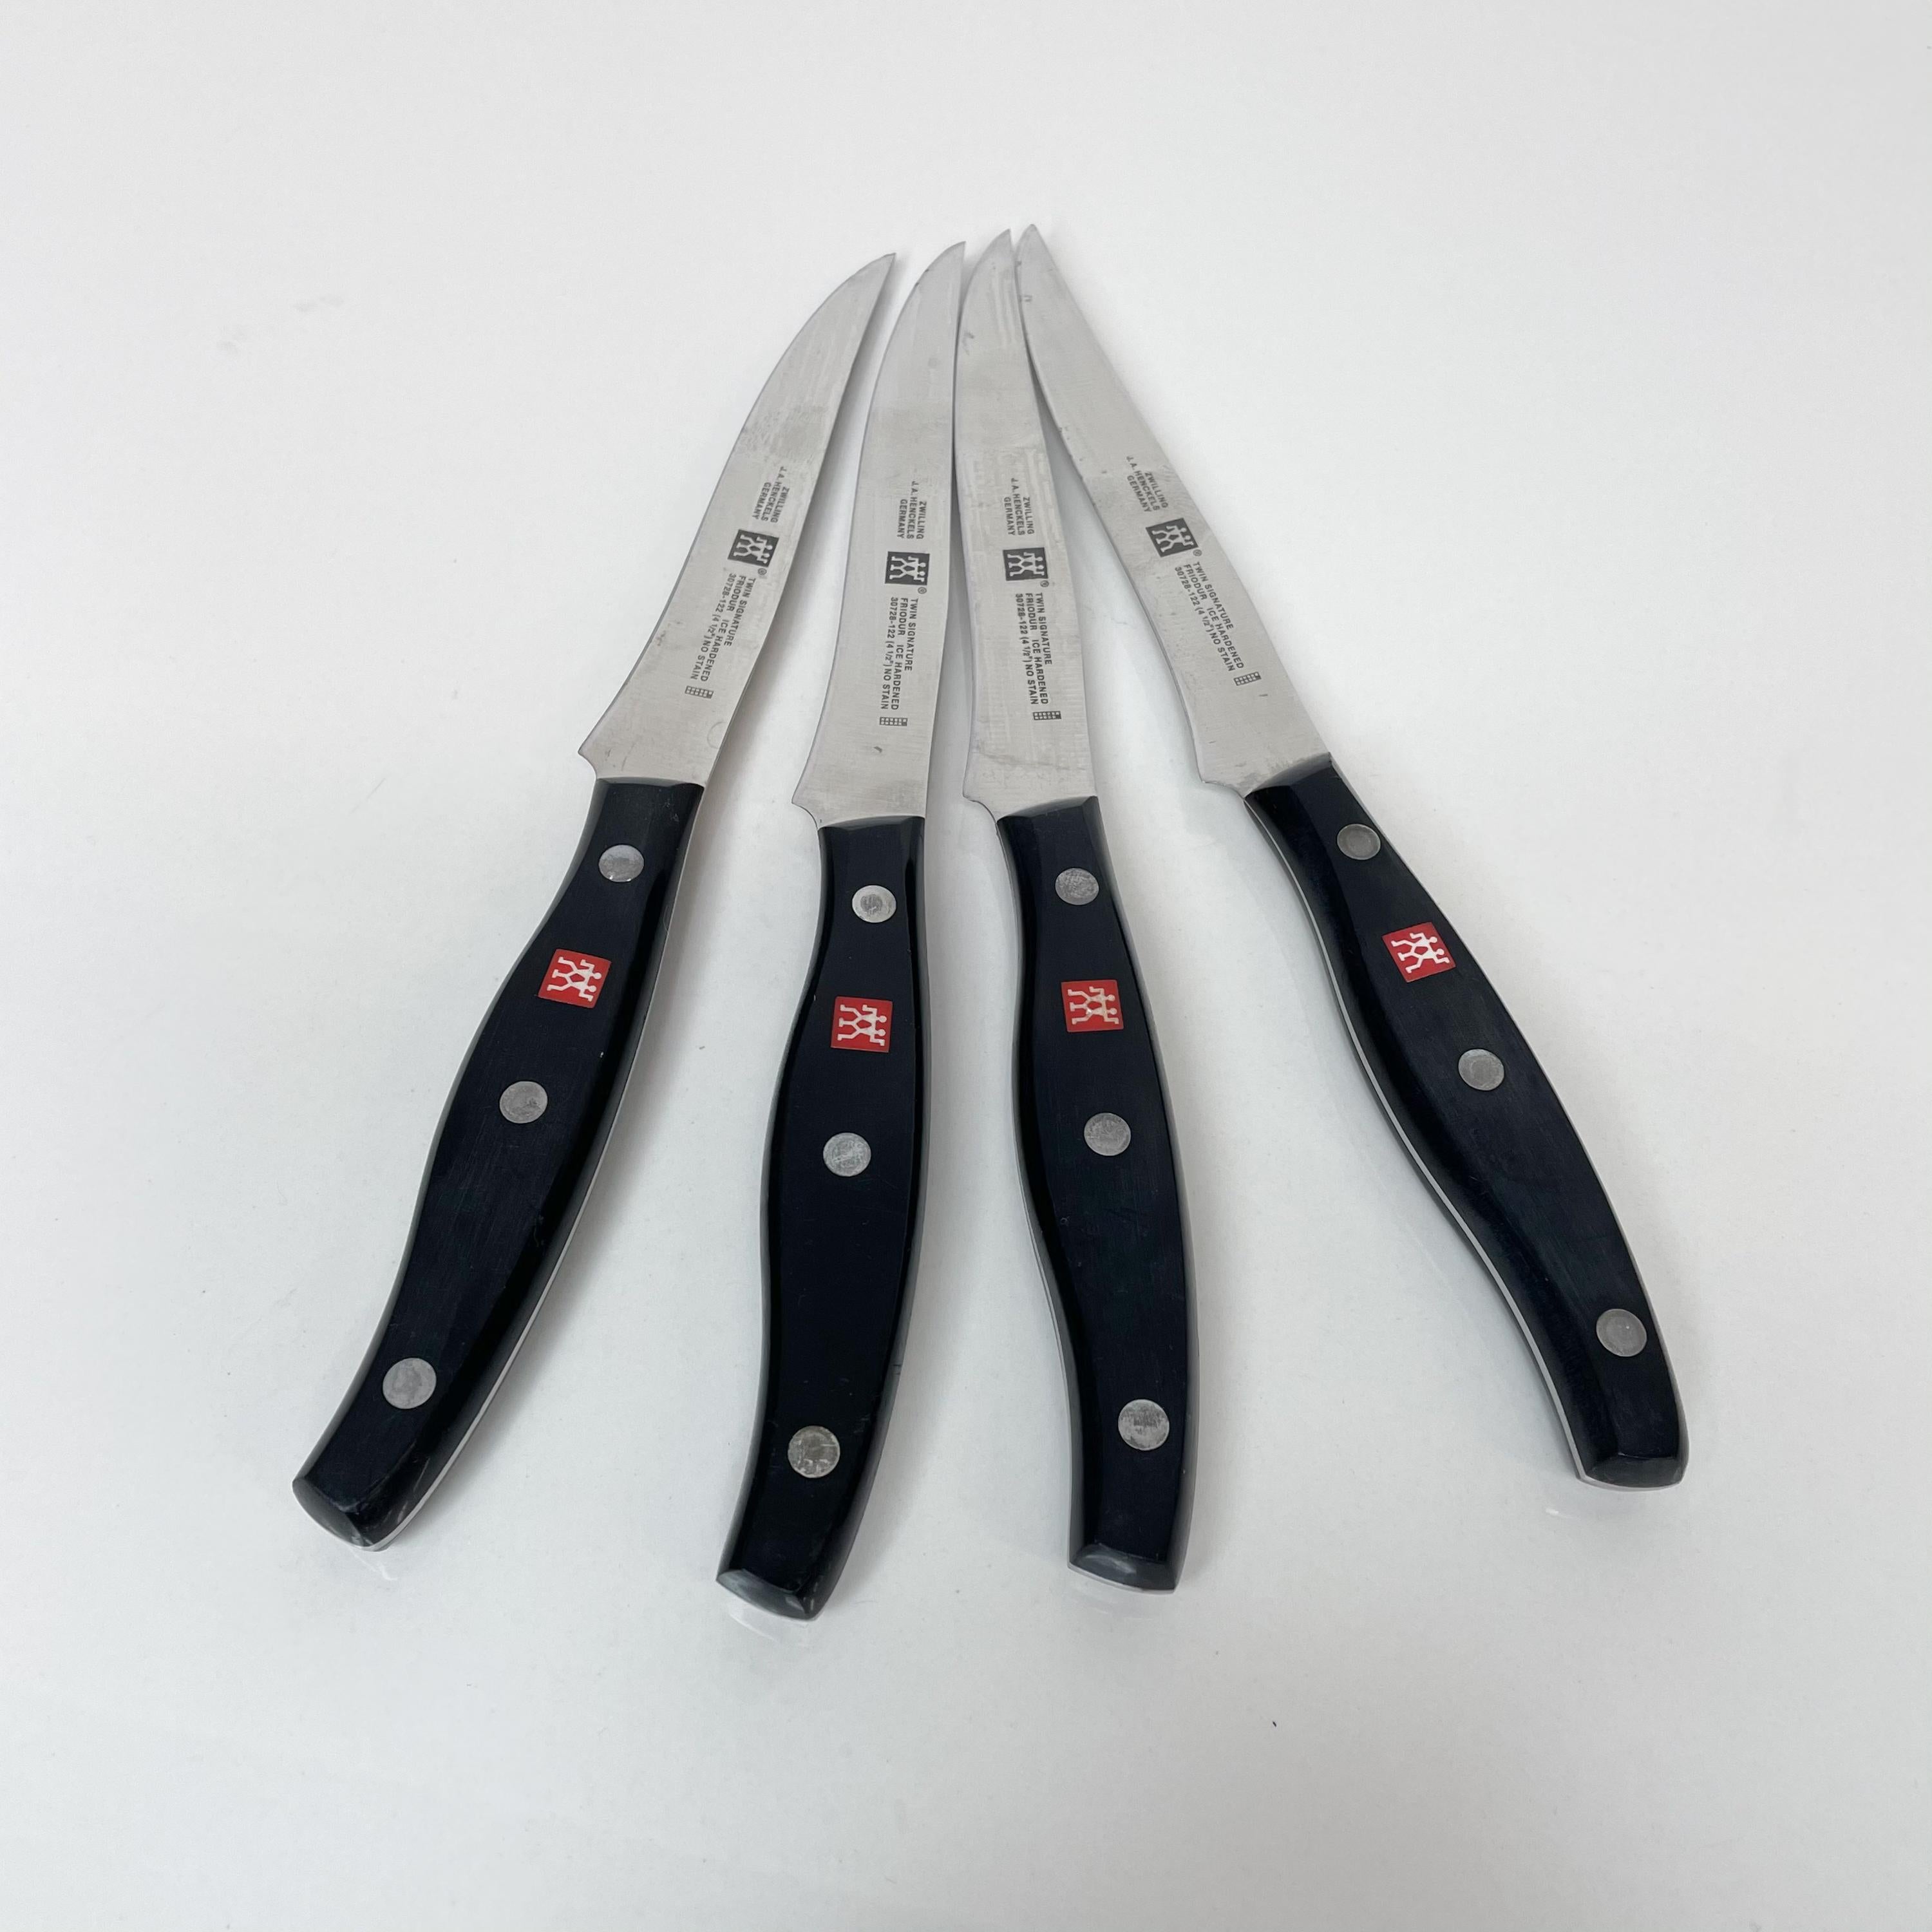 Vintage Set of 6 assorted Knives by Zwilling J A Henckles  Germany
Black Handles
Made in Germany. Maker Stamped.
4 knives at 9.13 L x .63 thick x 1 h
1 serrated knife at 4.25  
1 small knife at 4.13.
Original unrestored vintage preowned